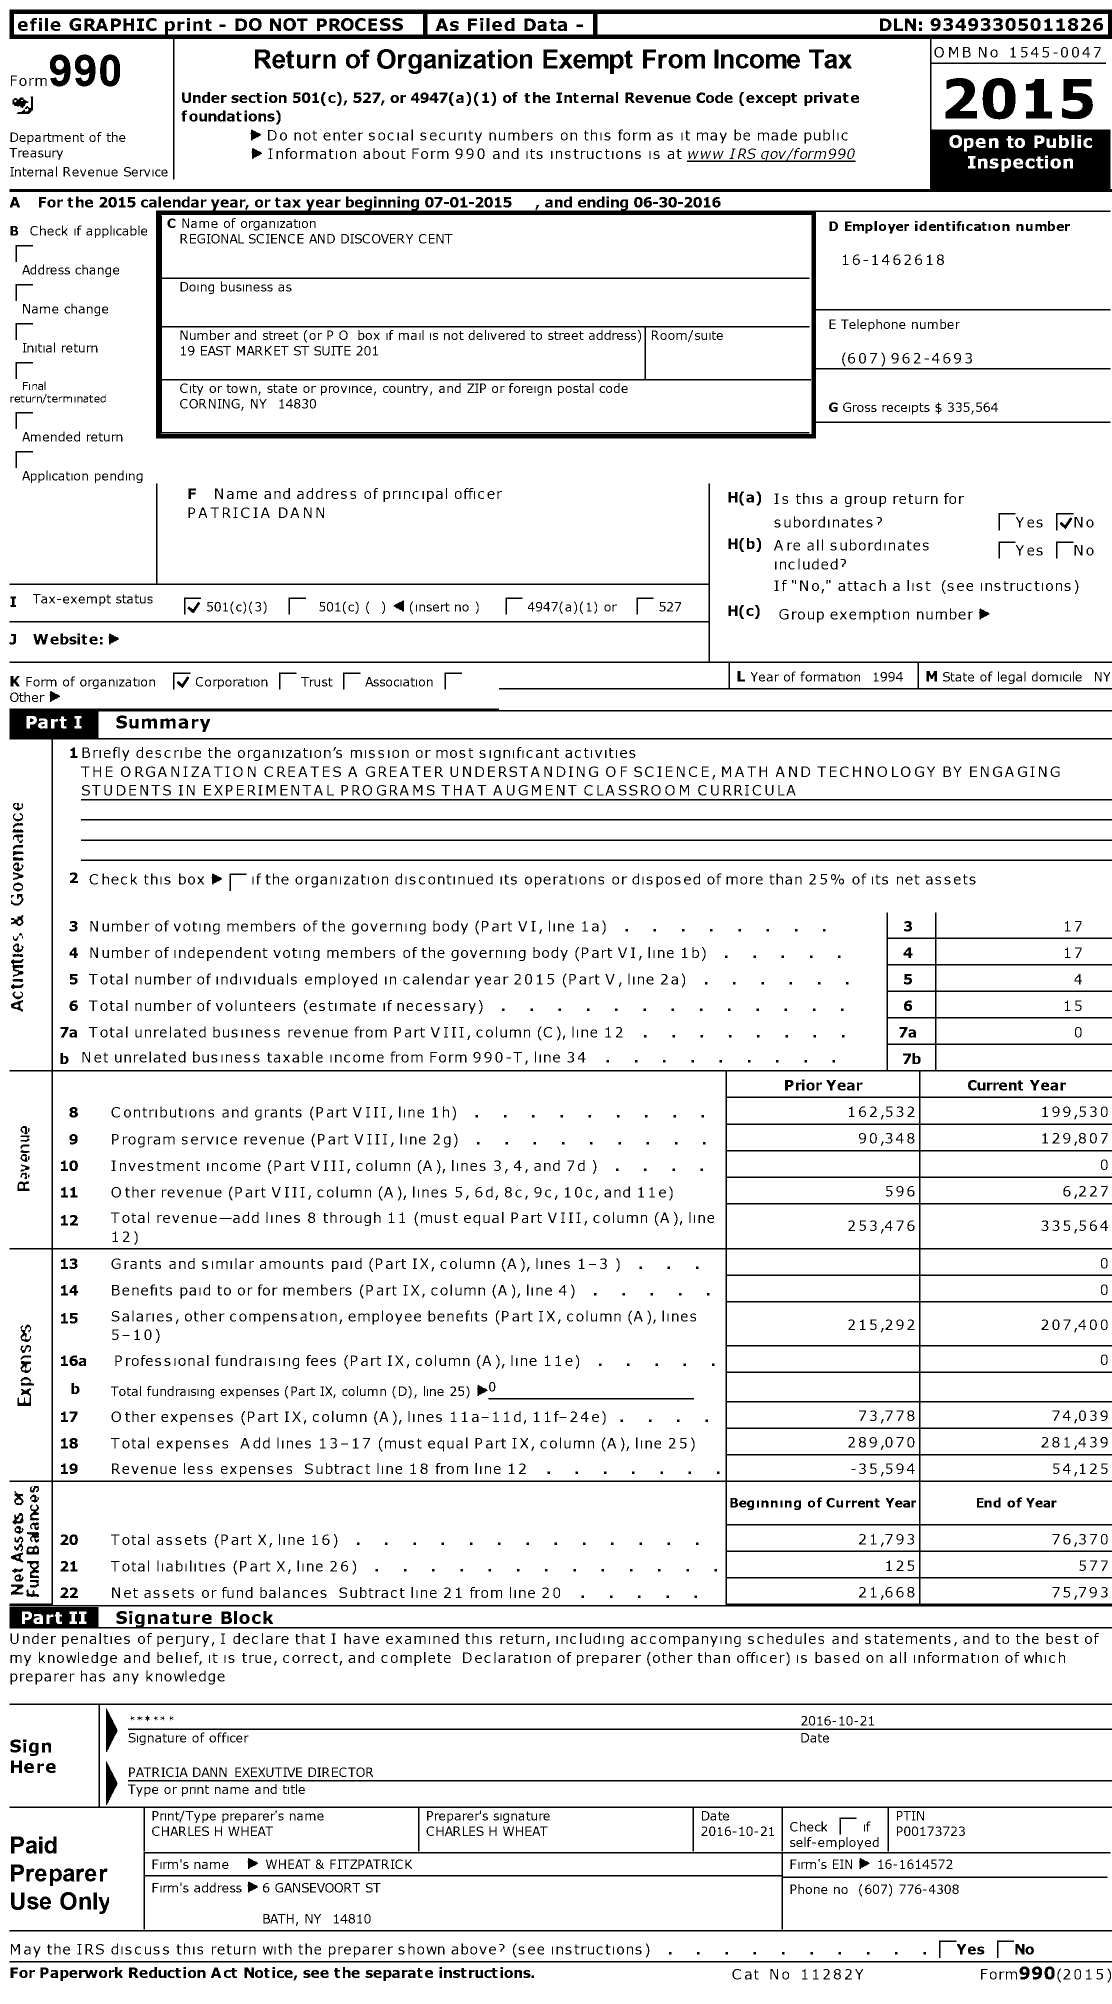 Image of first page of 2015 Form 990 for Regional Science and Discovery Cent